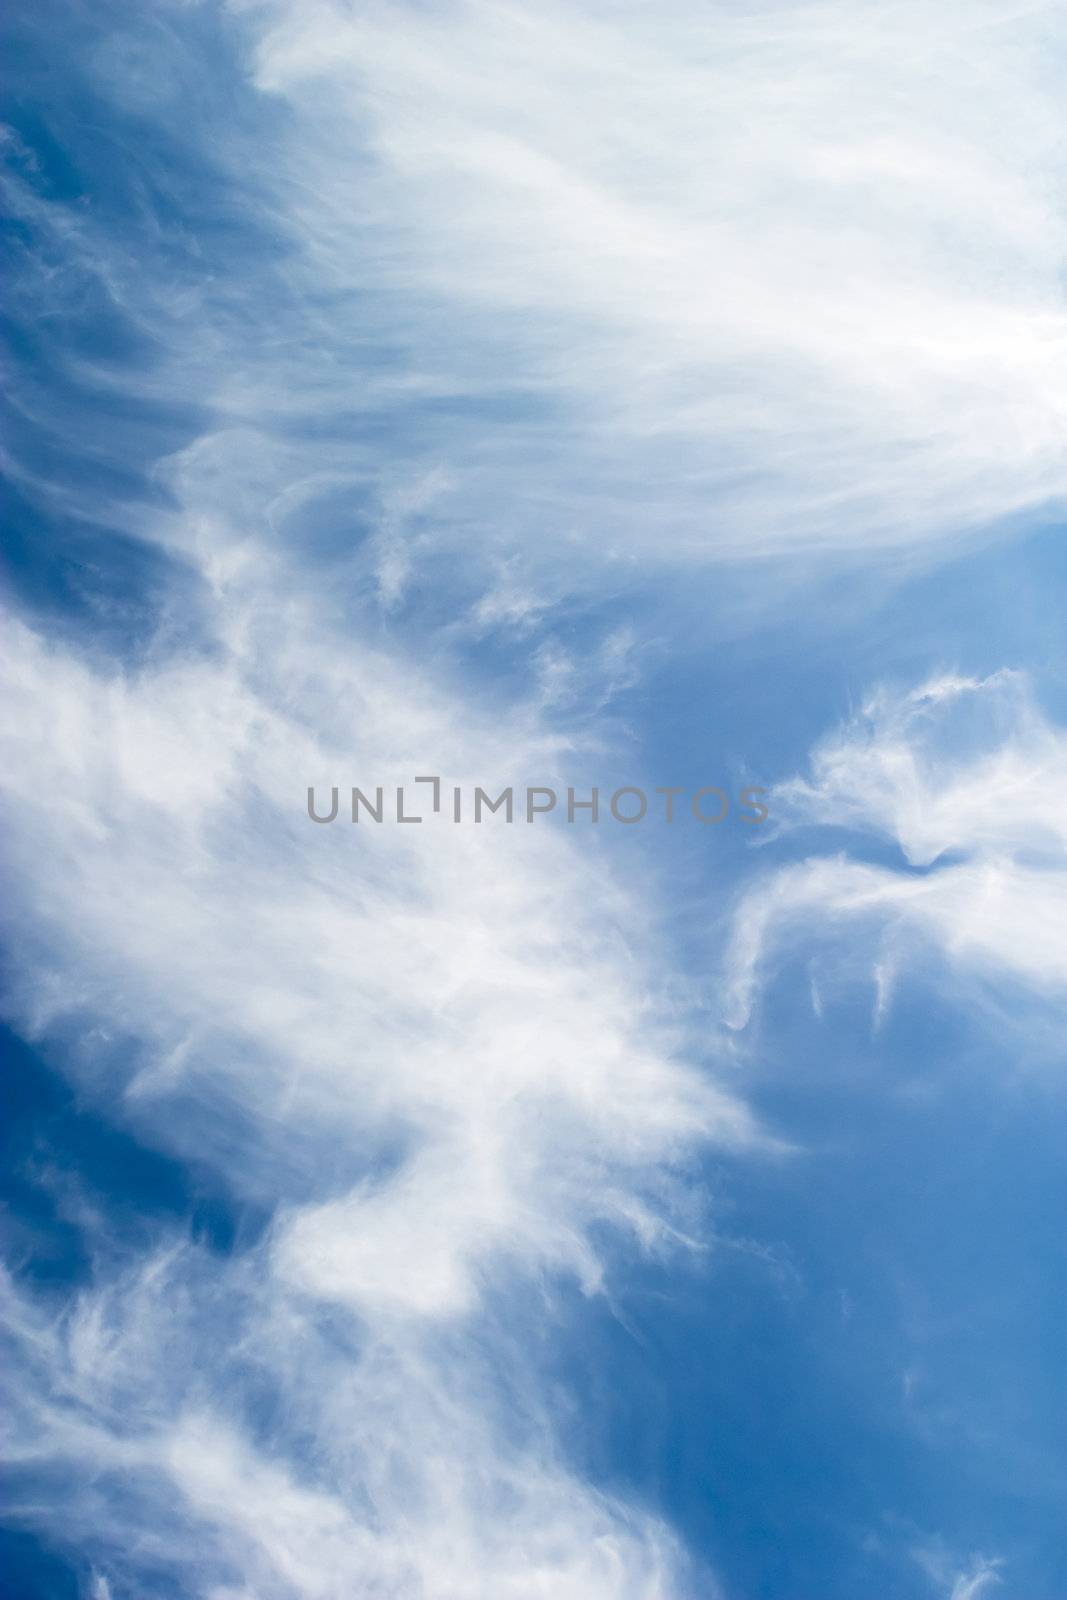 A cloud abstrct background image with whistful clouds and a deep blue sky